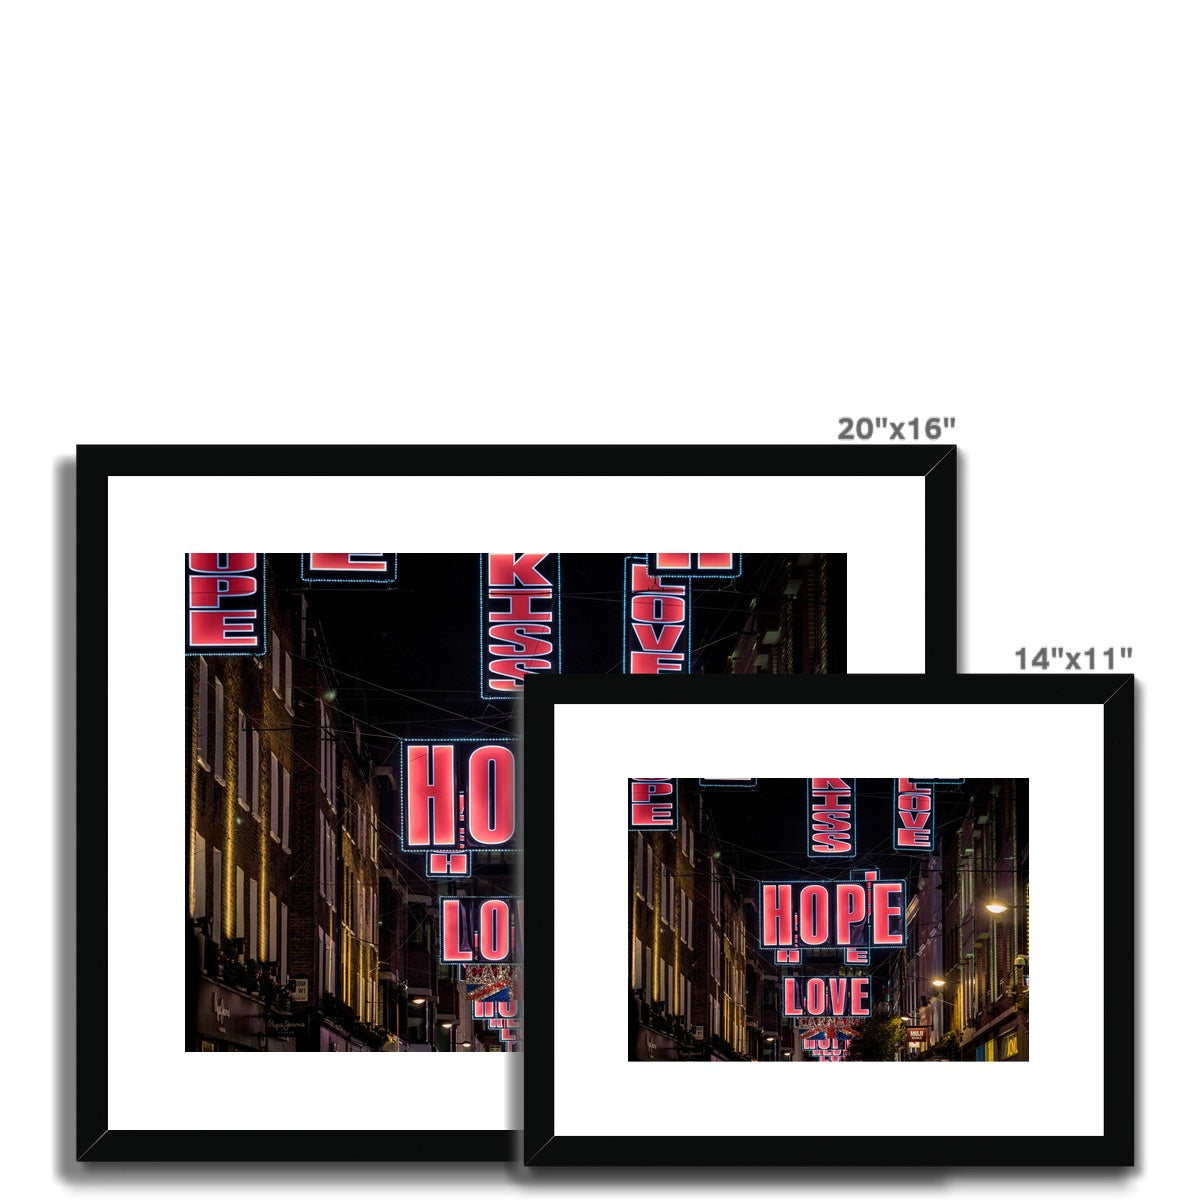 Hope and Love Christmas illuminations in Carnaby Street, London, UK. Framed & Mounted Print